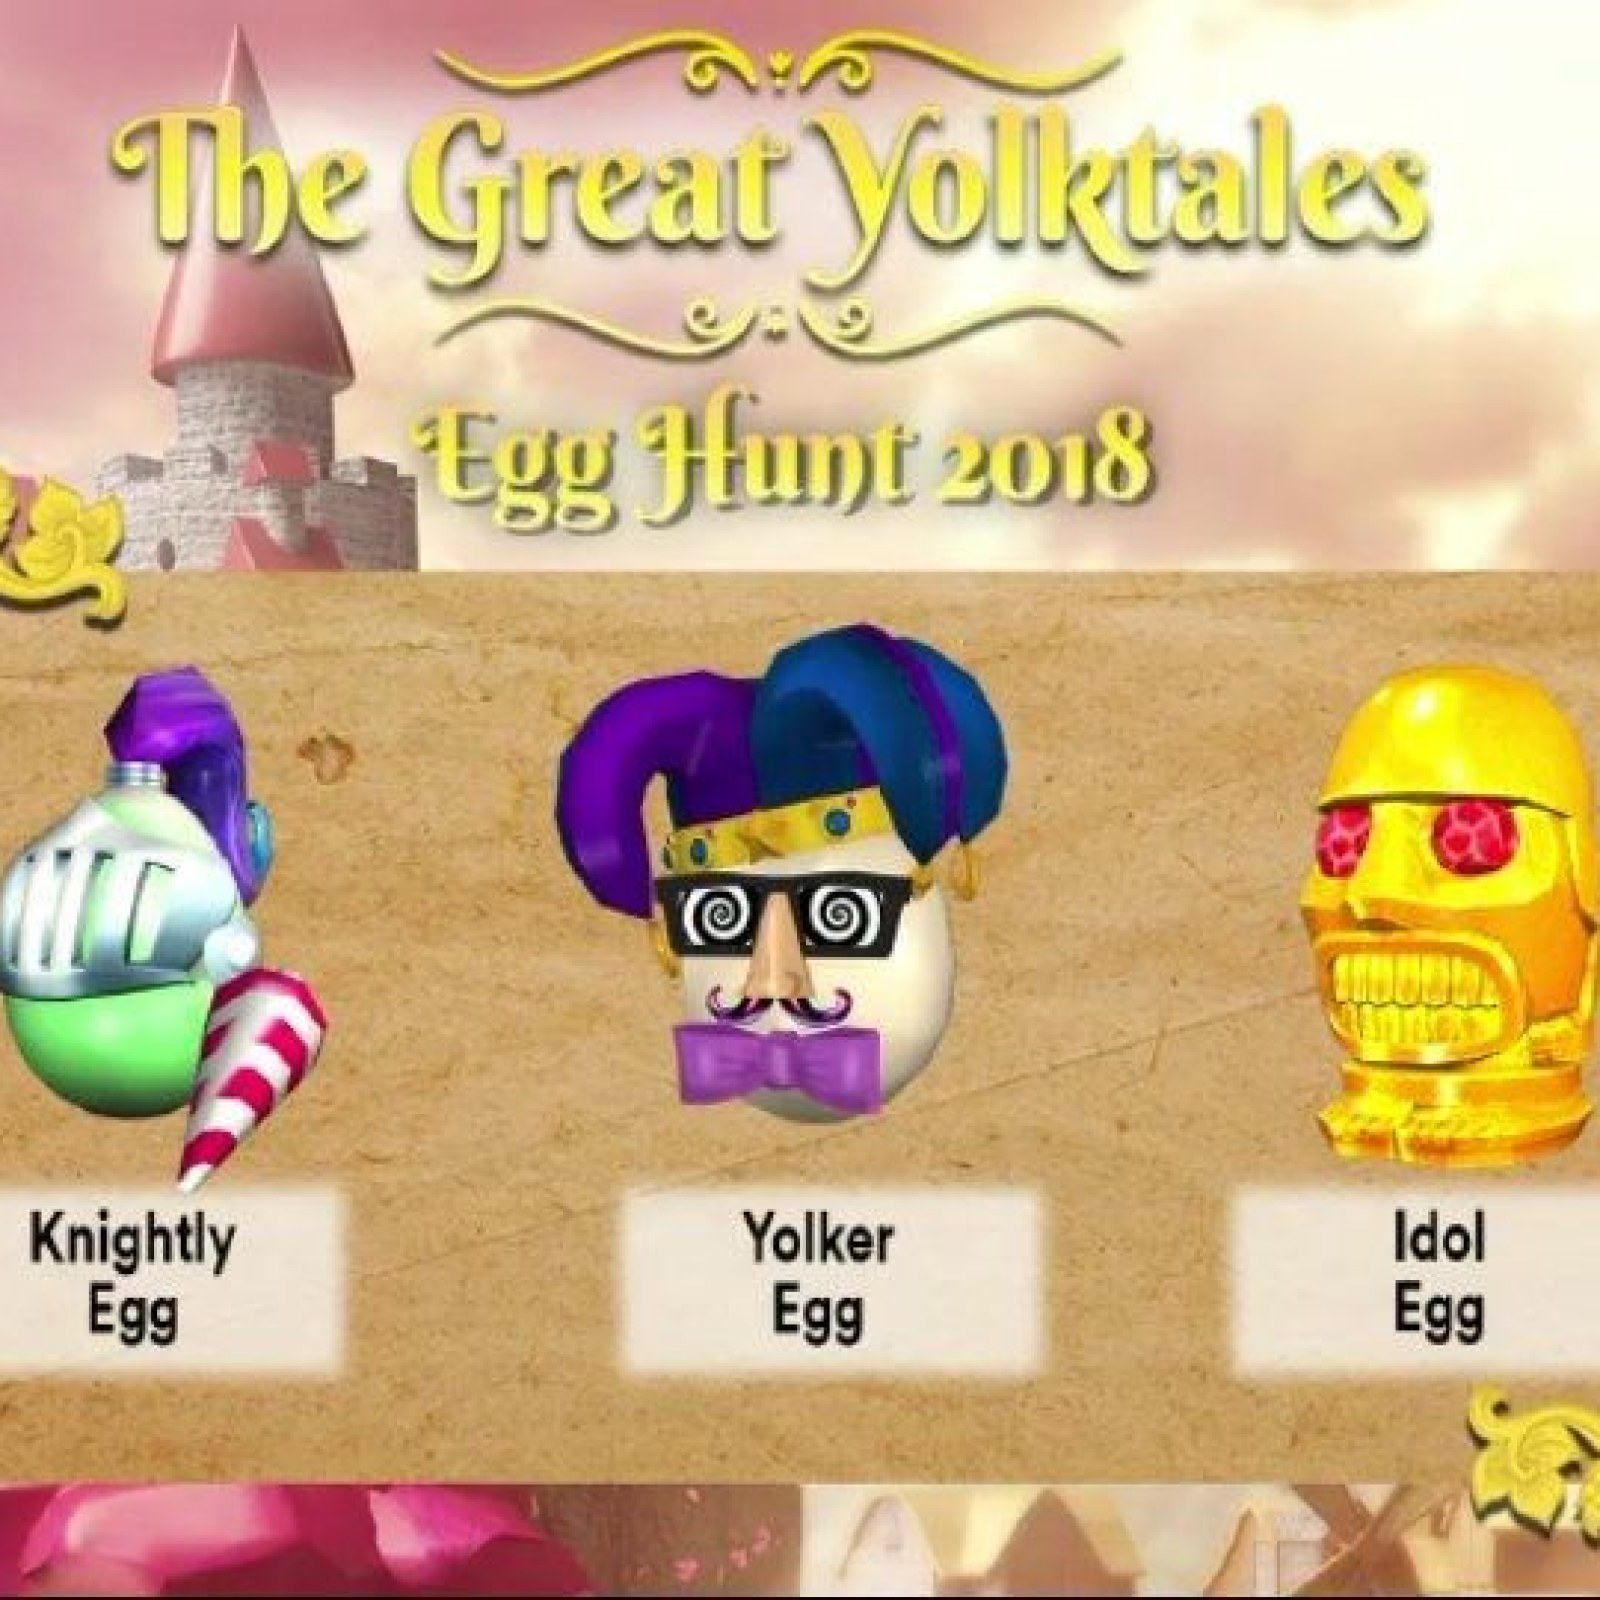 Roblox Egg Hunt 2018 All Eggs Hats Badges And Other Items Leaked So Far